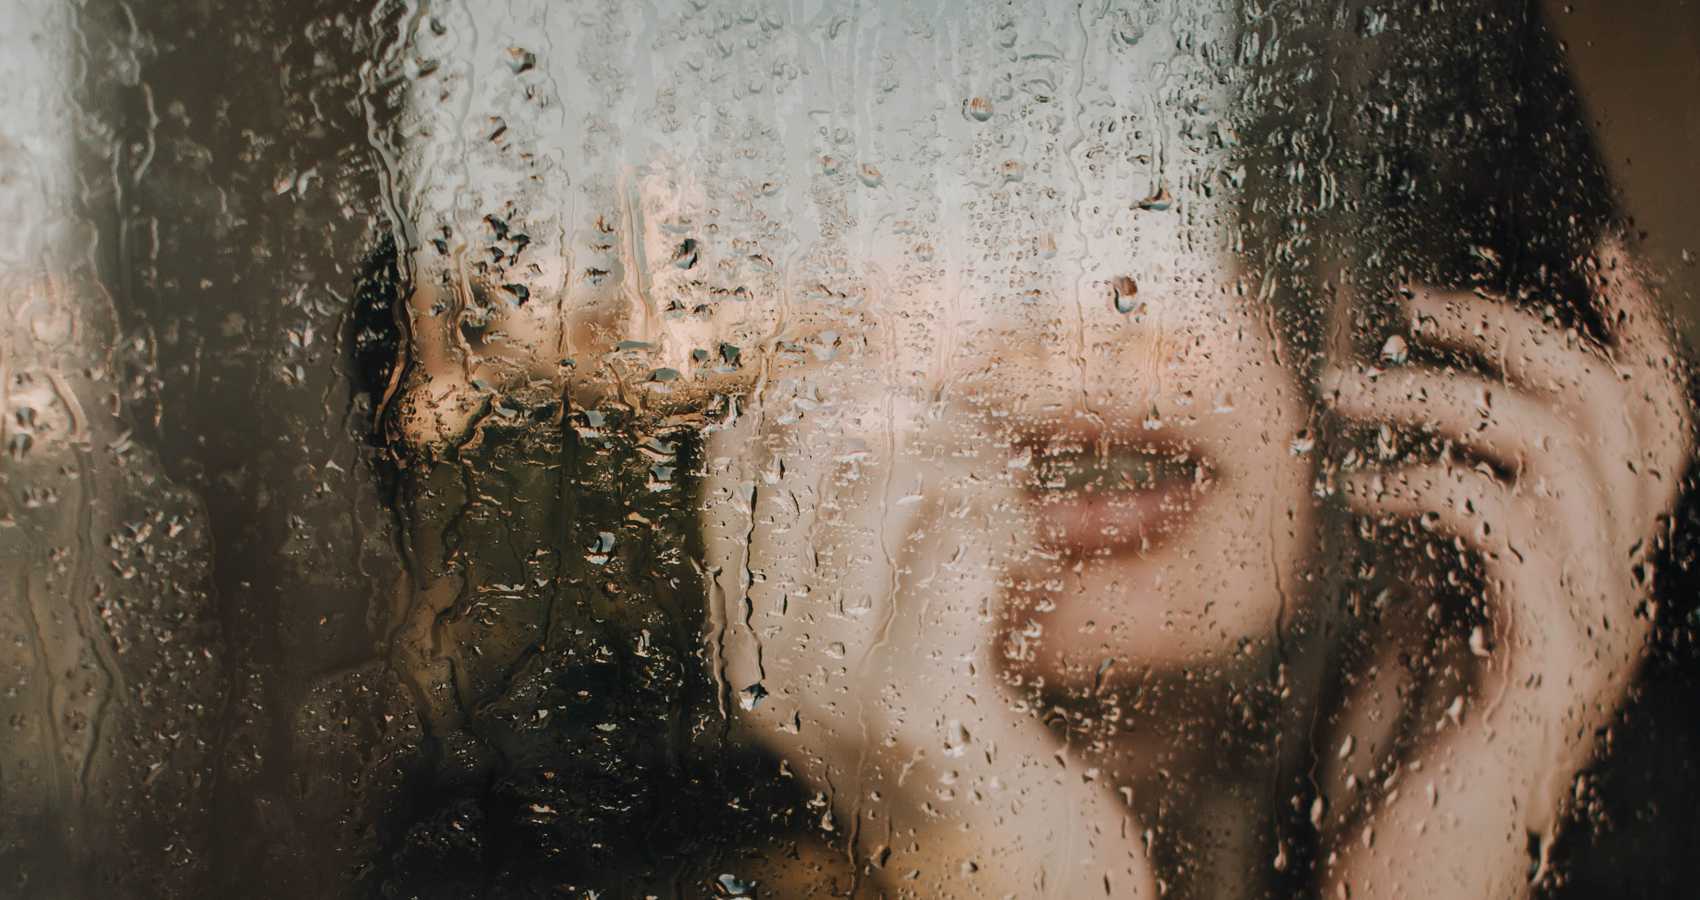 Walking in The Rain, poetry by Dawn Minott at Spillwords.com